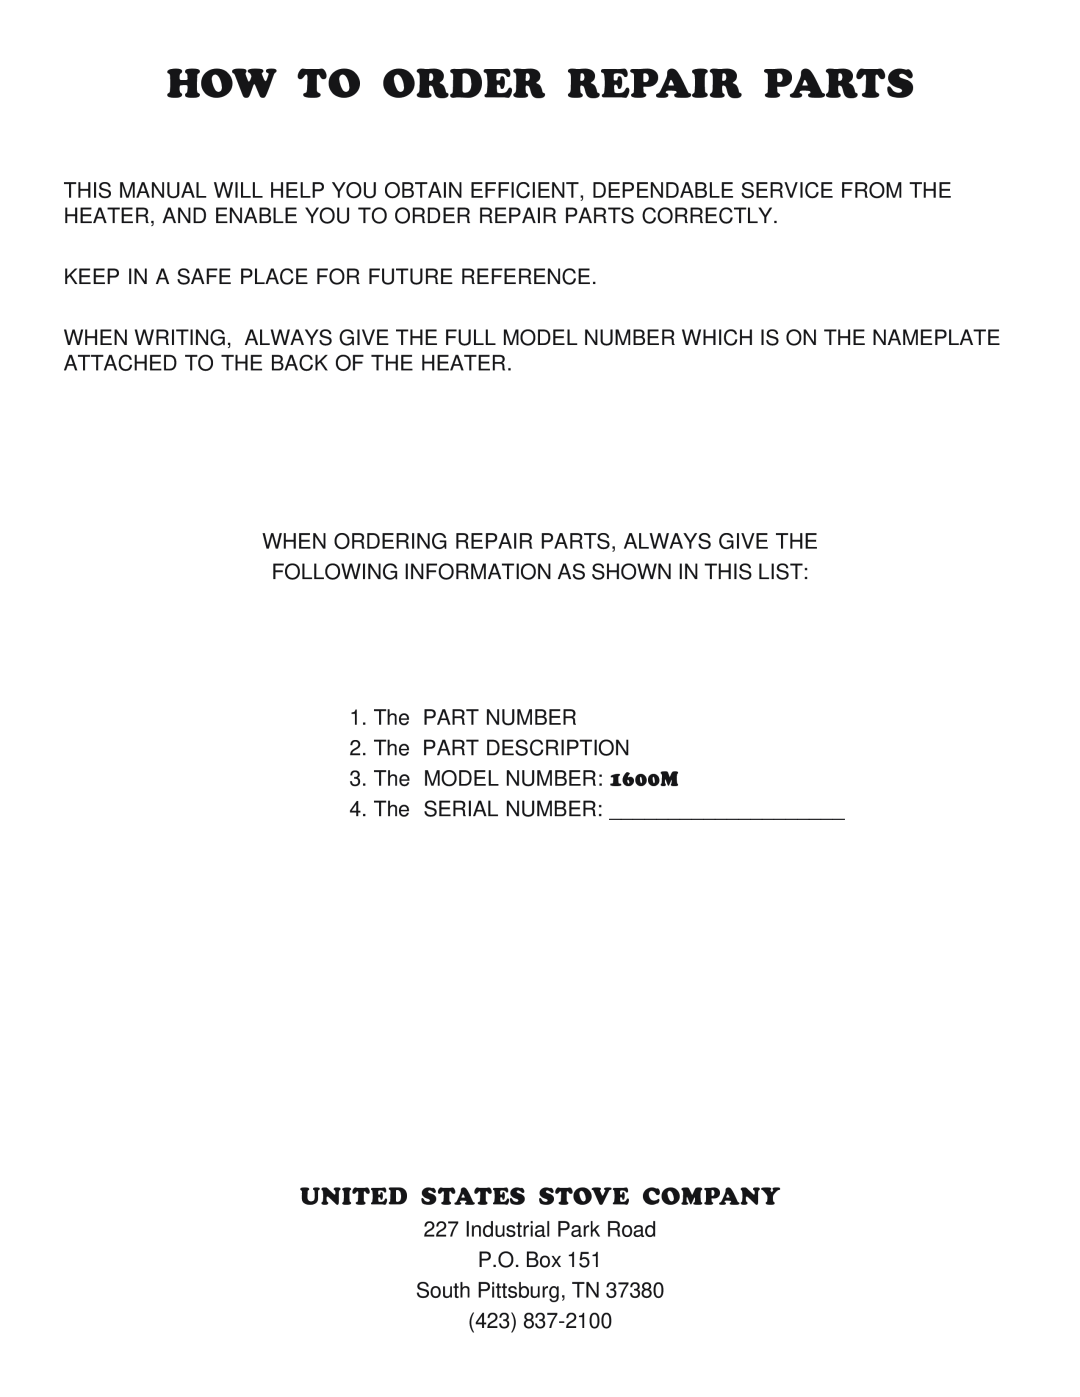 United States Stove 1600M manual How To Order Repair Parts, United States Stove Company 